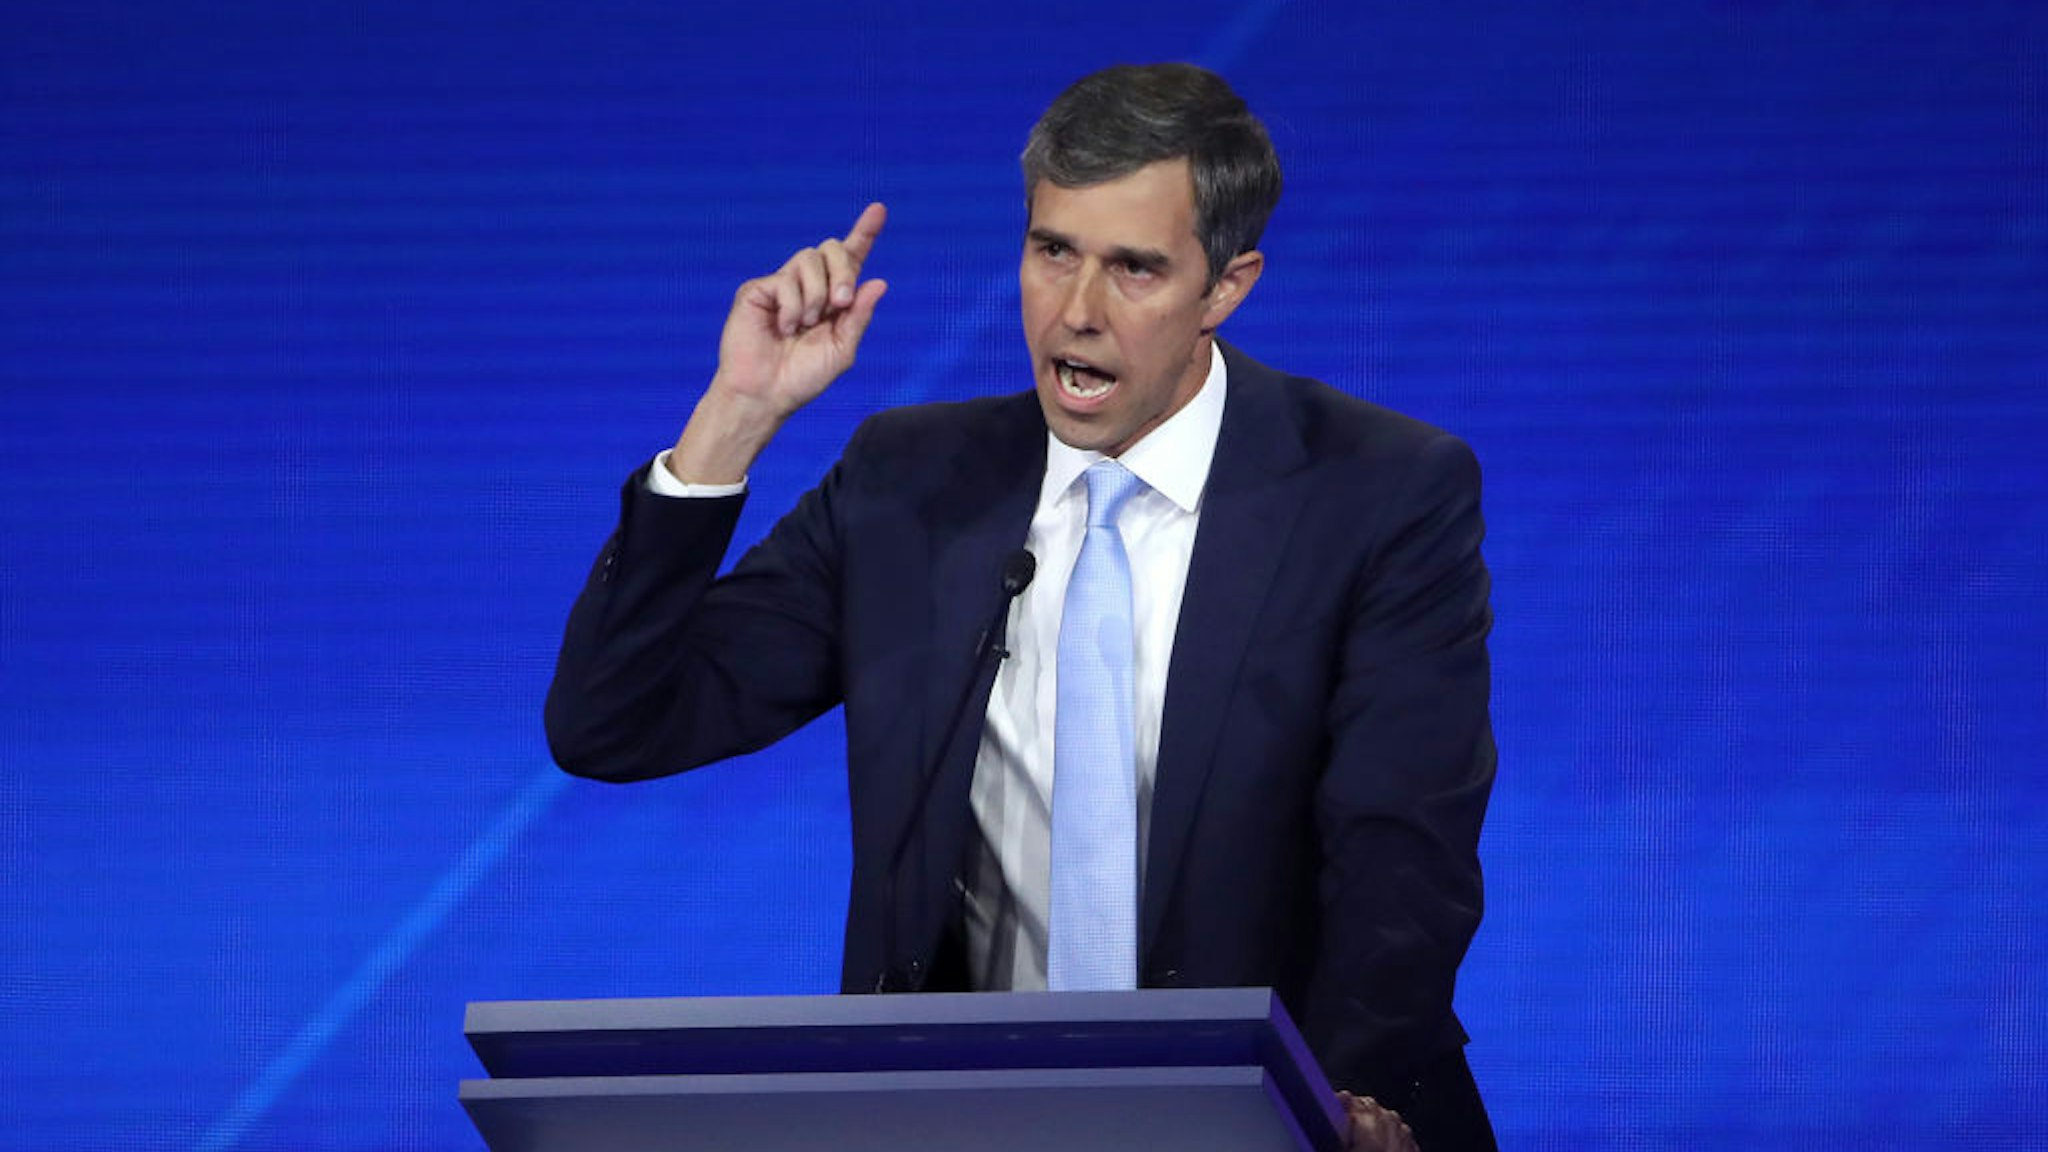 HOUSTON, TEXAS - SEPTEMBER 12: Democratic presidential candidate former Texas congressman Beto O'Rourke speaks during the Democratic Presidential Debate at Texas Southern University's Health and PE Center on September 12, 2019 in Houston, Texas. Ten Democratic presidential hopefuls were chosen from the larger field of candidates to participate in the debate hosted by ABC News in partnership with Univision.